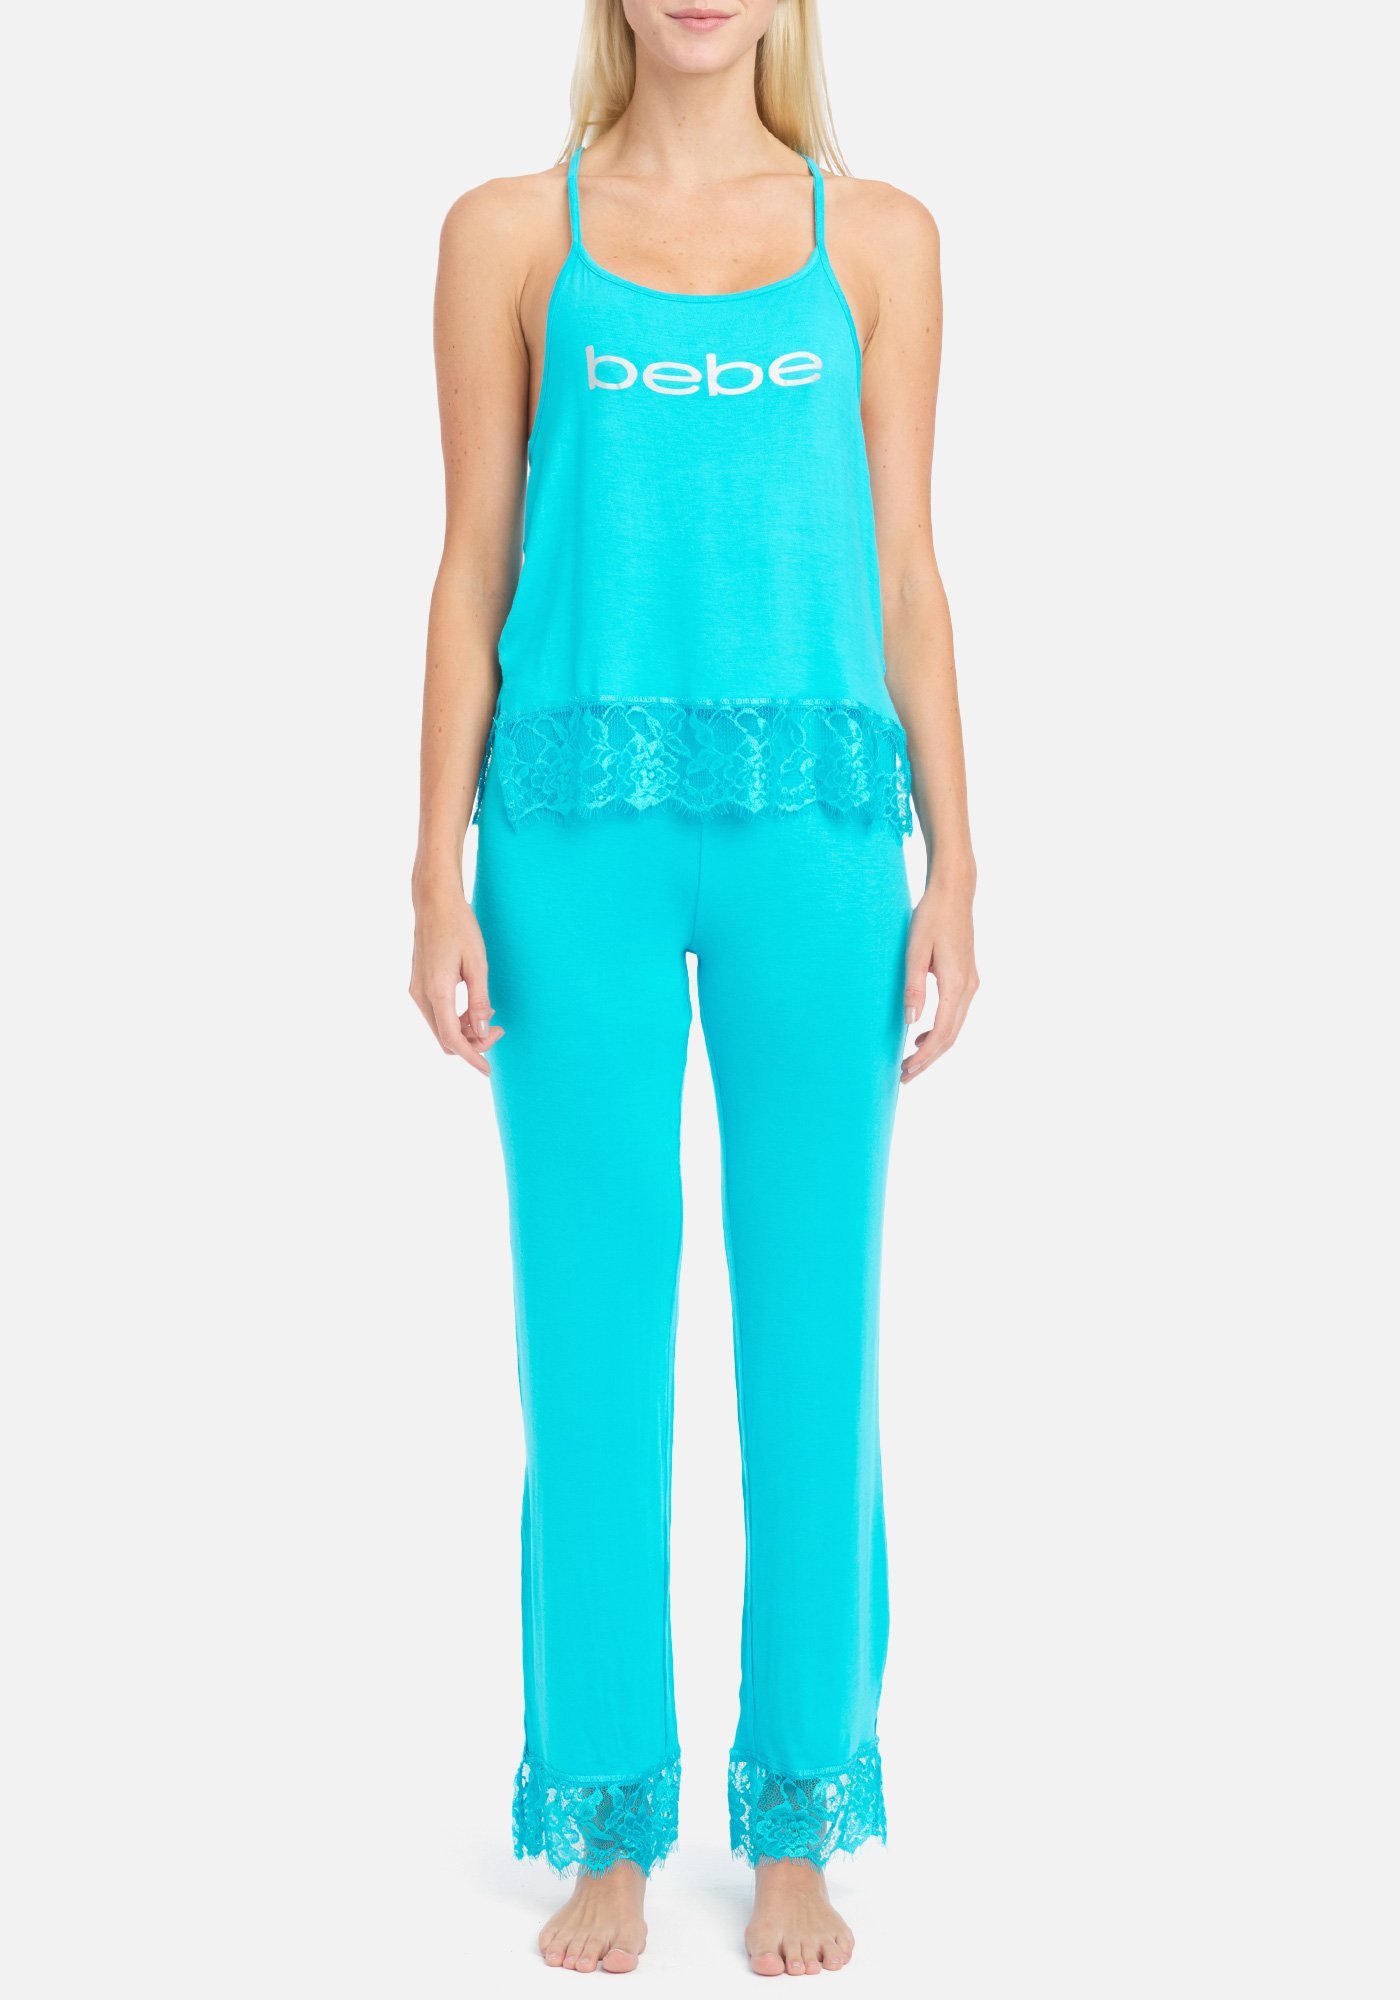 Women's Bebe Lace Detail Pant Set, Size Large in Turquoise Spandex